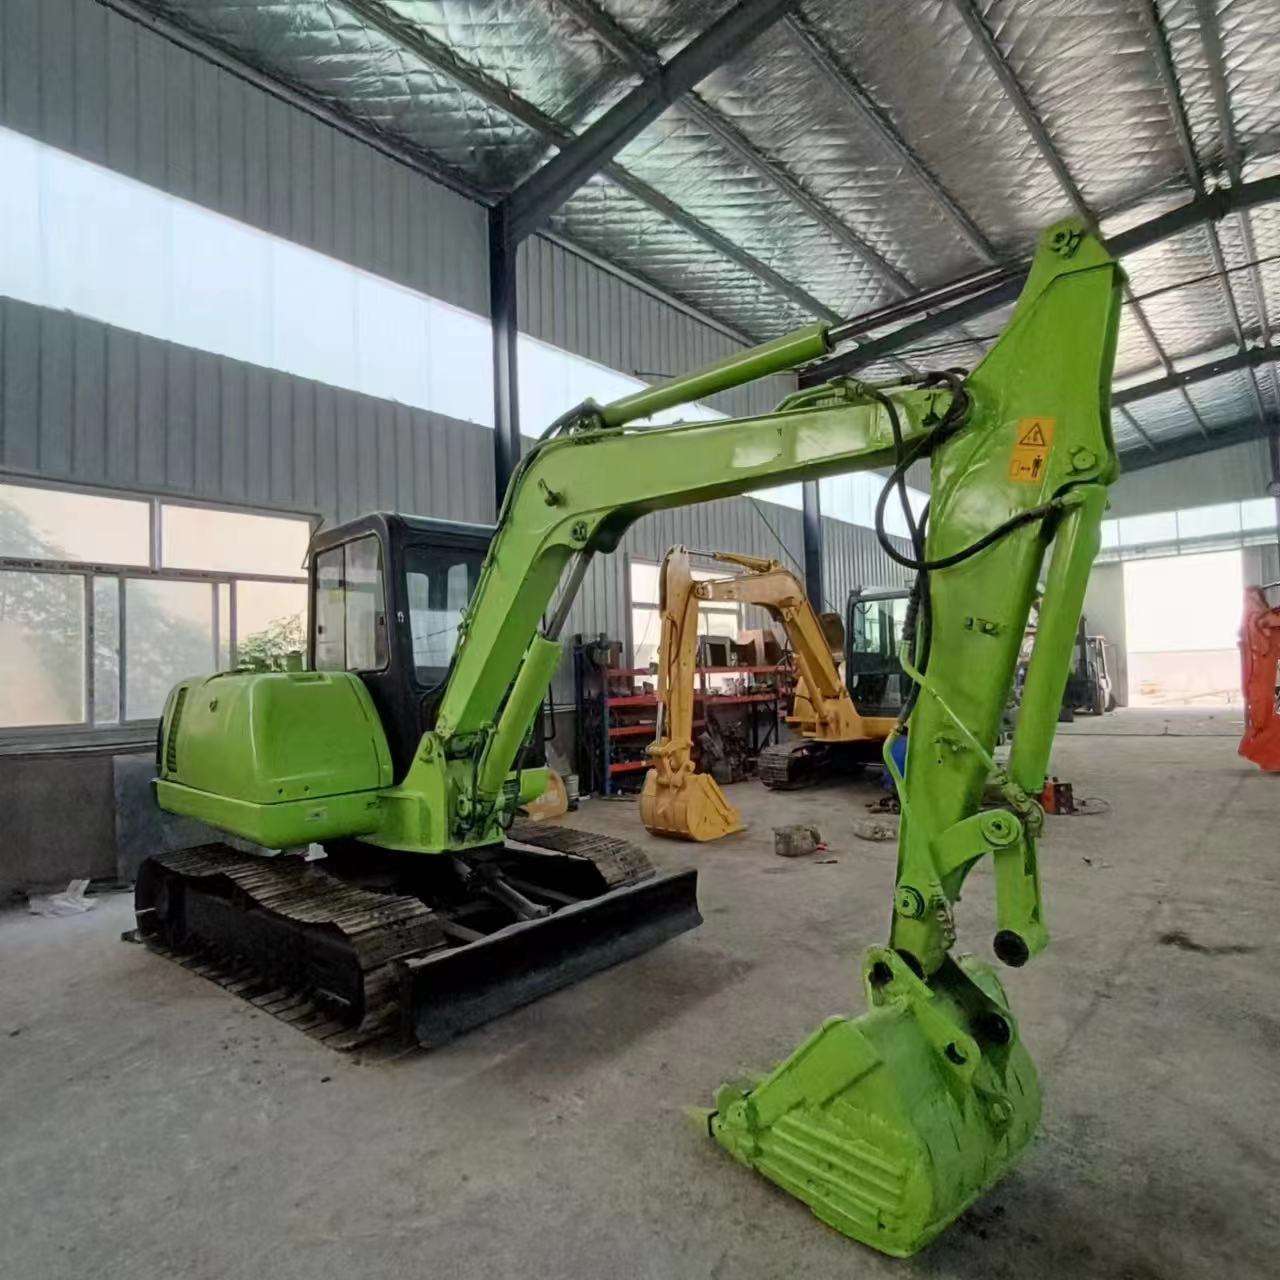 How Are Excavator Mats Made?